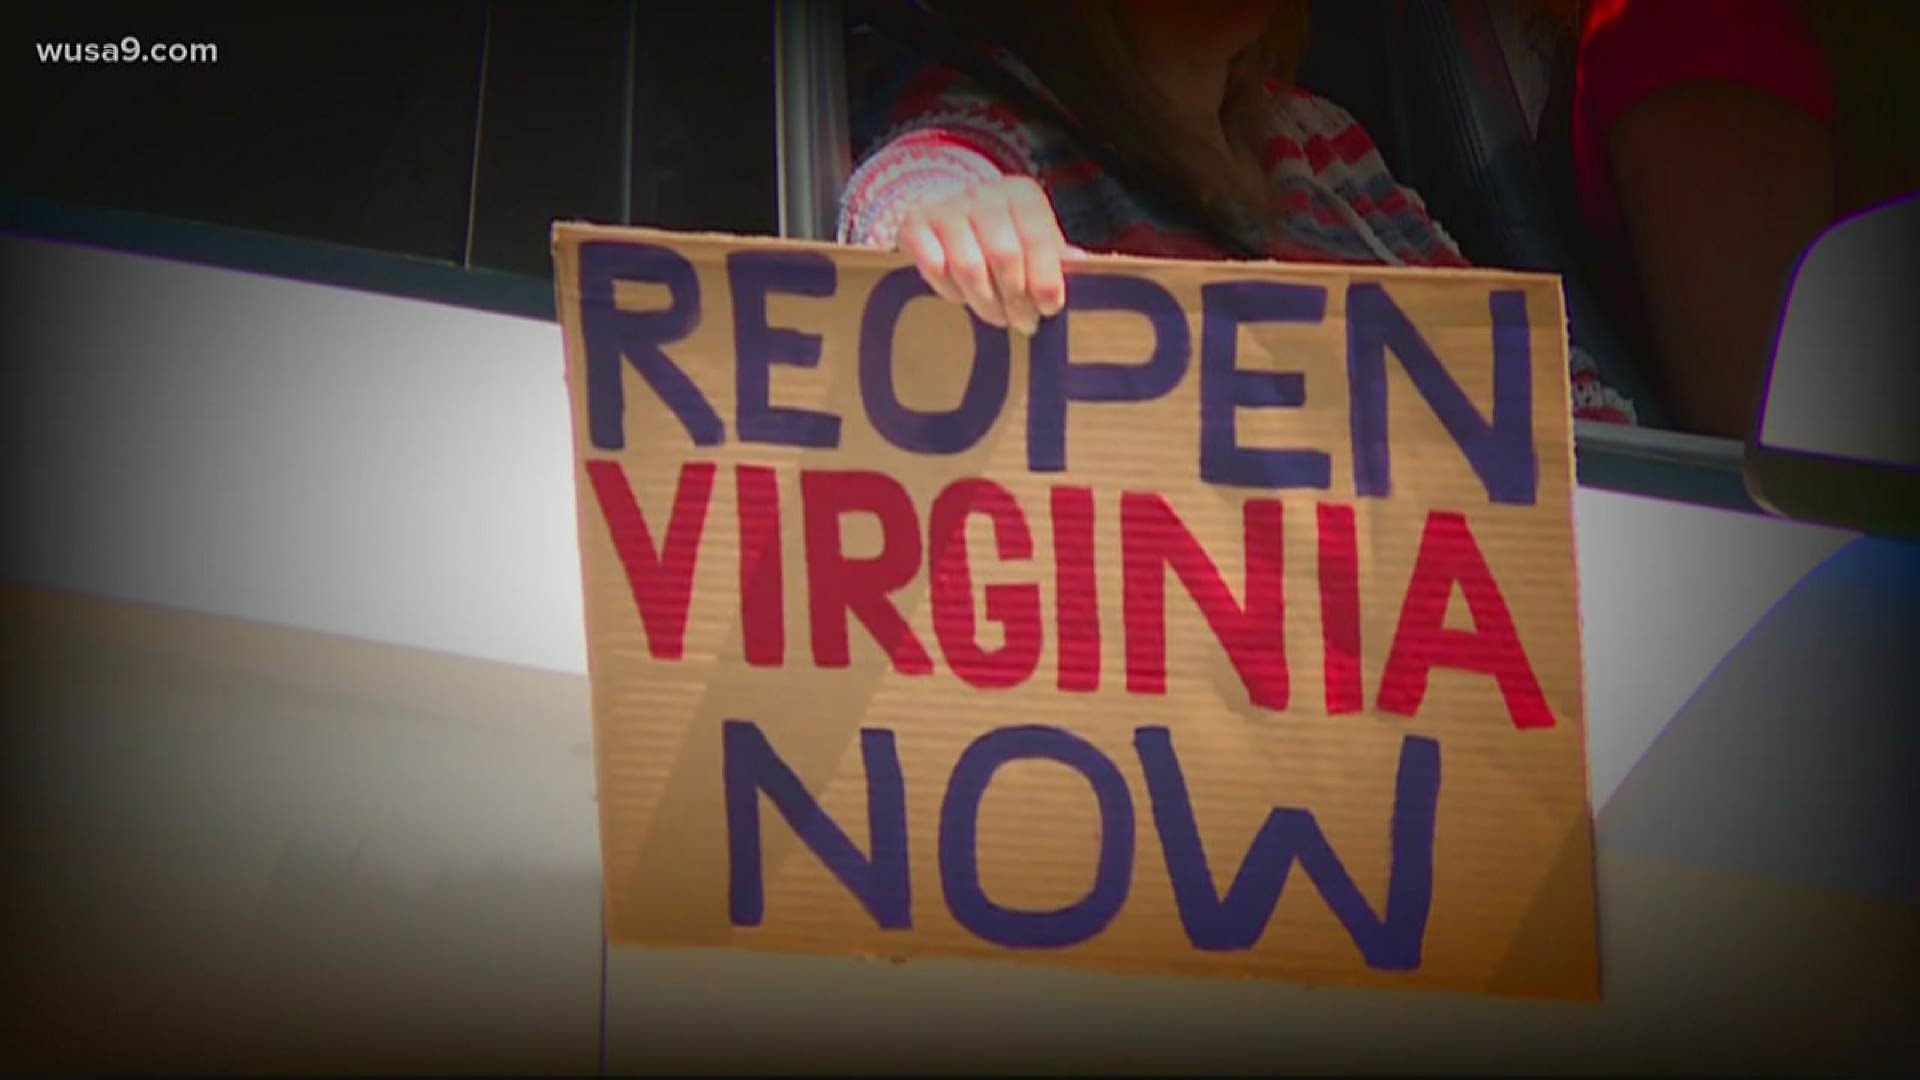 Virginia’s governor announced a partial reopening plan for the commonwealth on Friday, and said May 8 would be the earliest its first phase could be implemented.